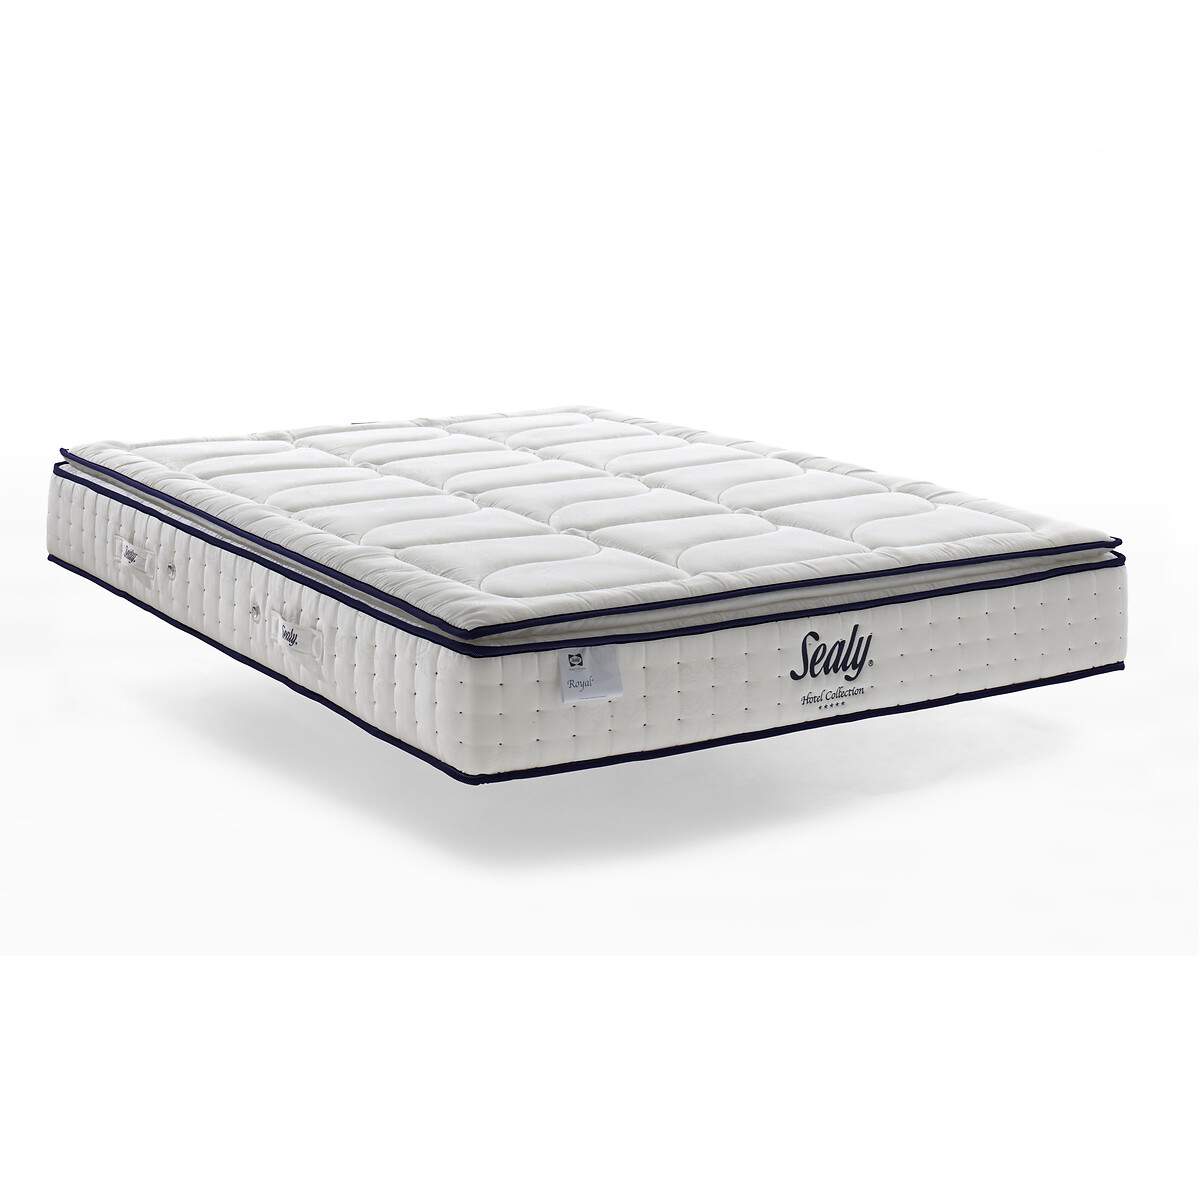 matelas royal+ ressorts ensaches confort luxe